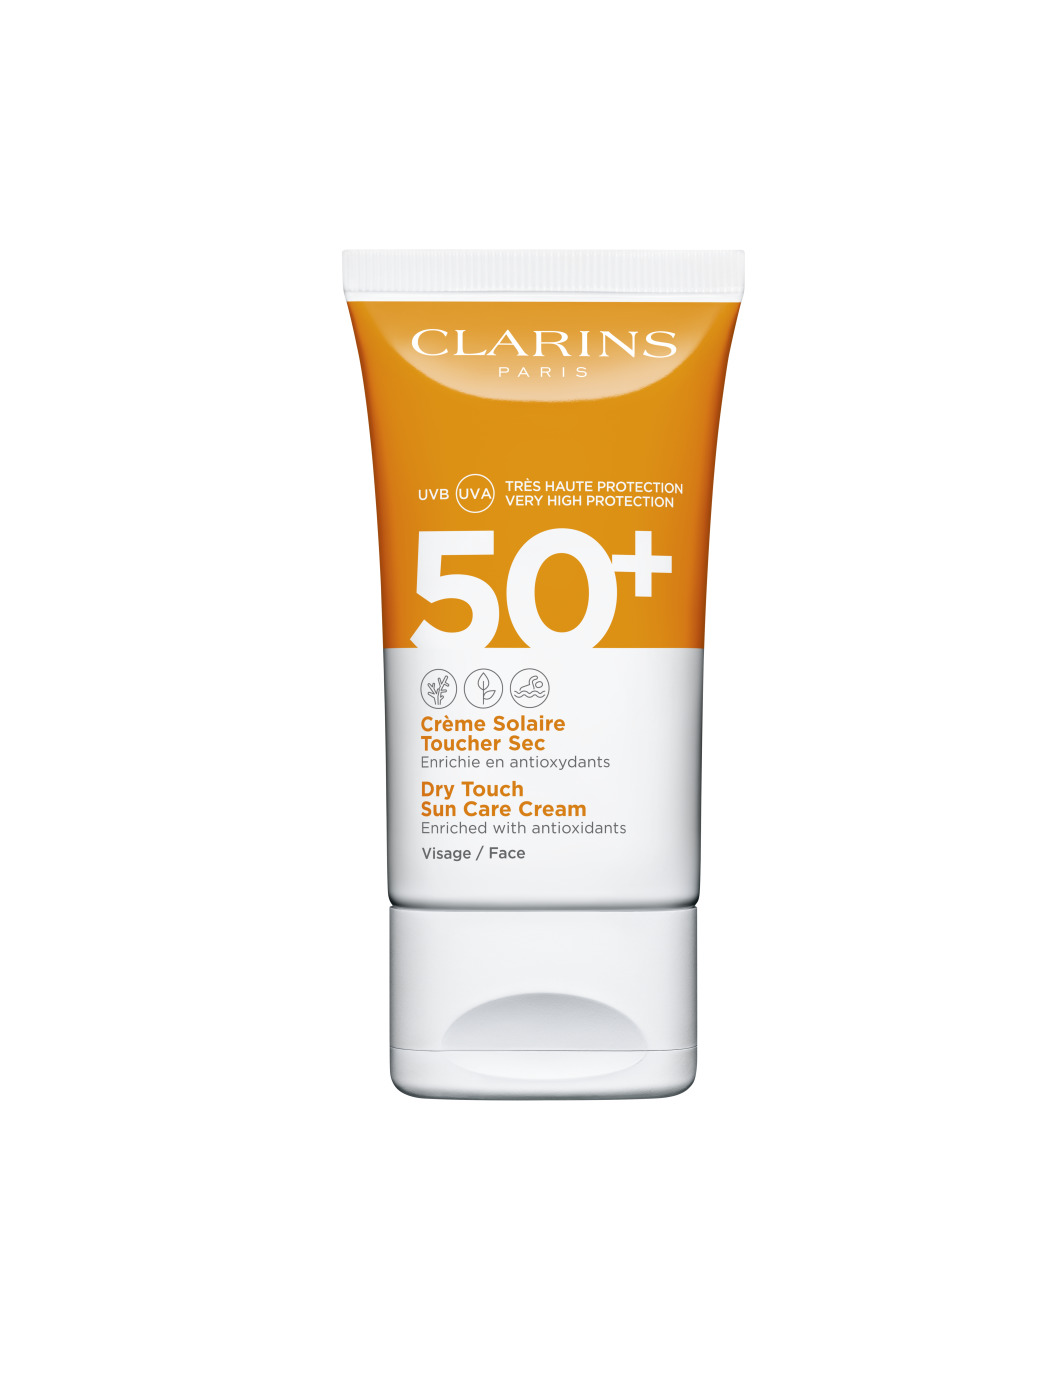 Clarins Dry Touch Face Suncare UVB UVA 